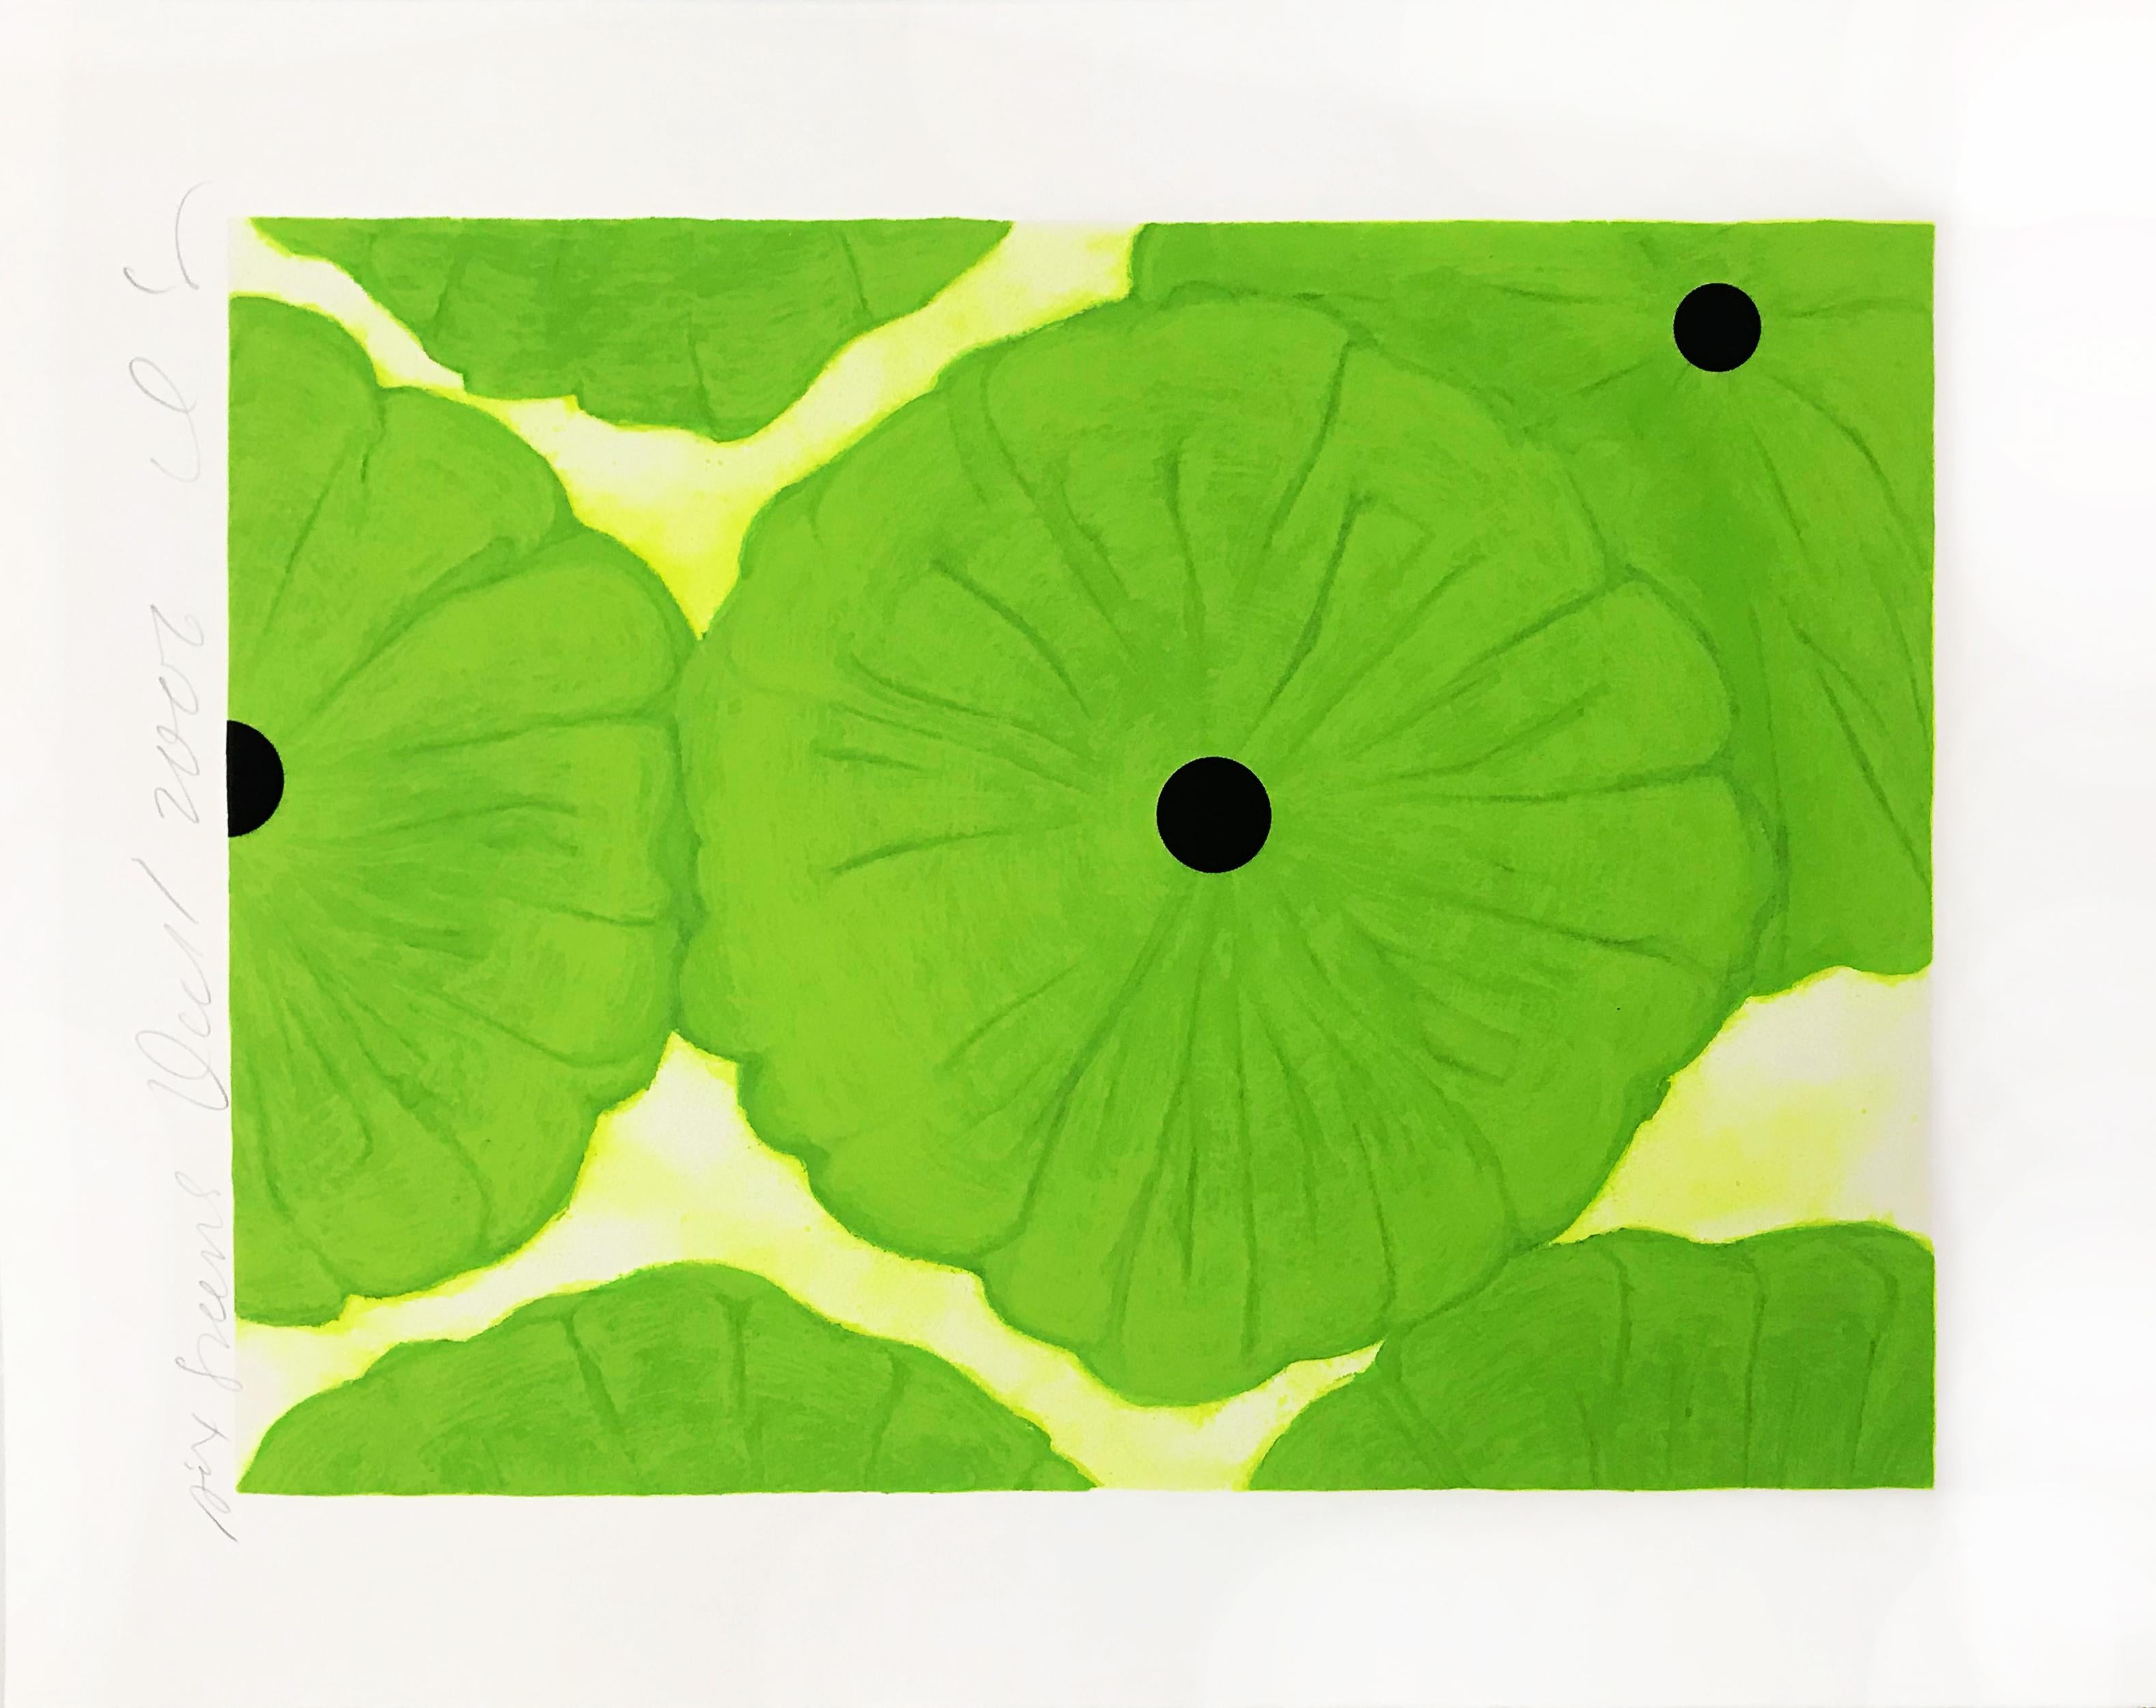 Donald Sultan
"Six Greens"
2006; Screenprint
30 1/2 x 38 1/2 inches
Edition of 60
